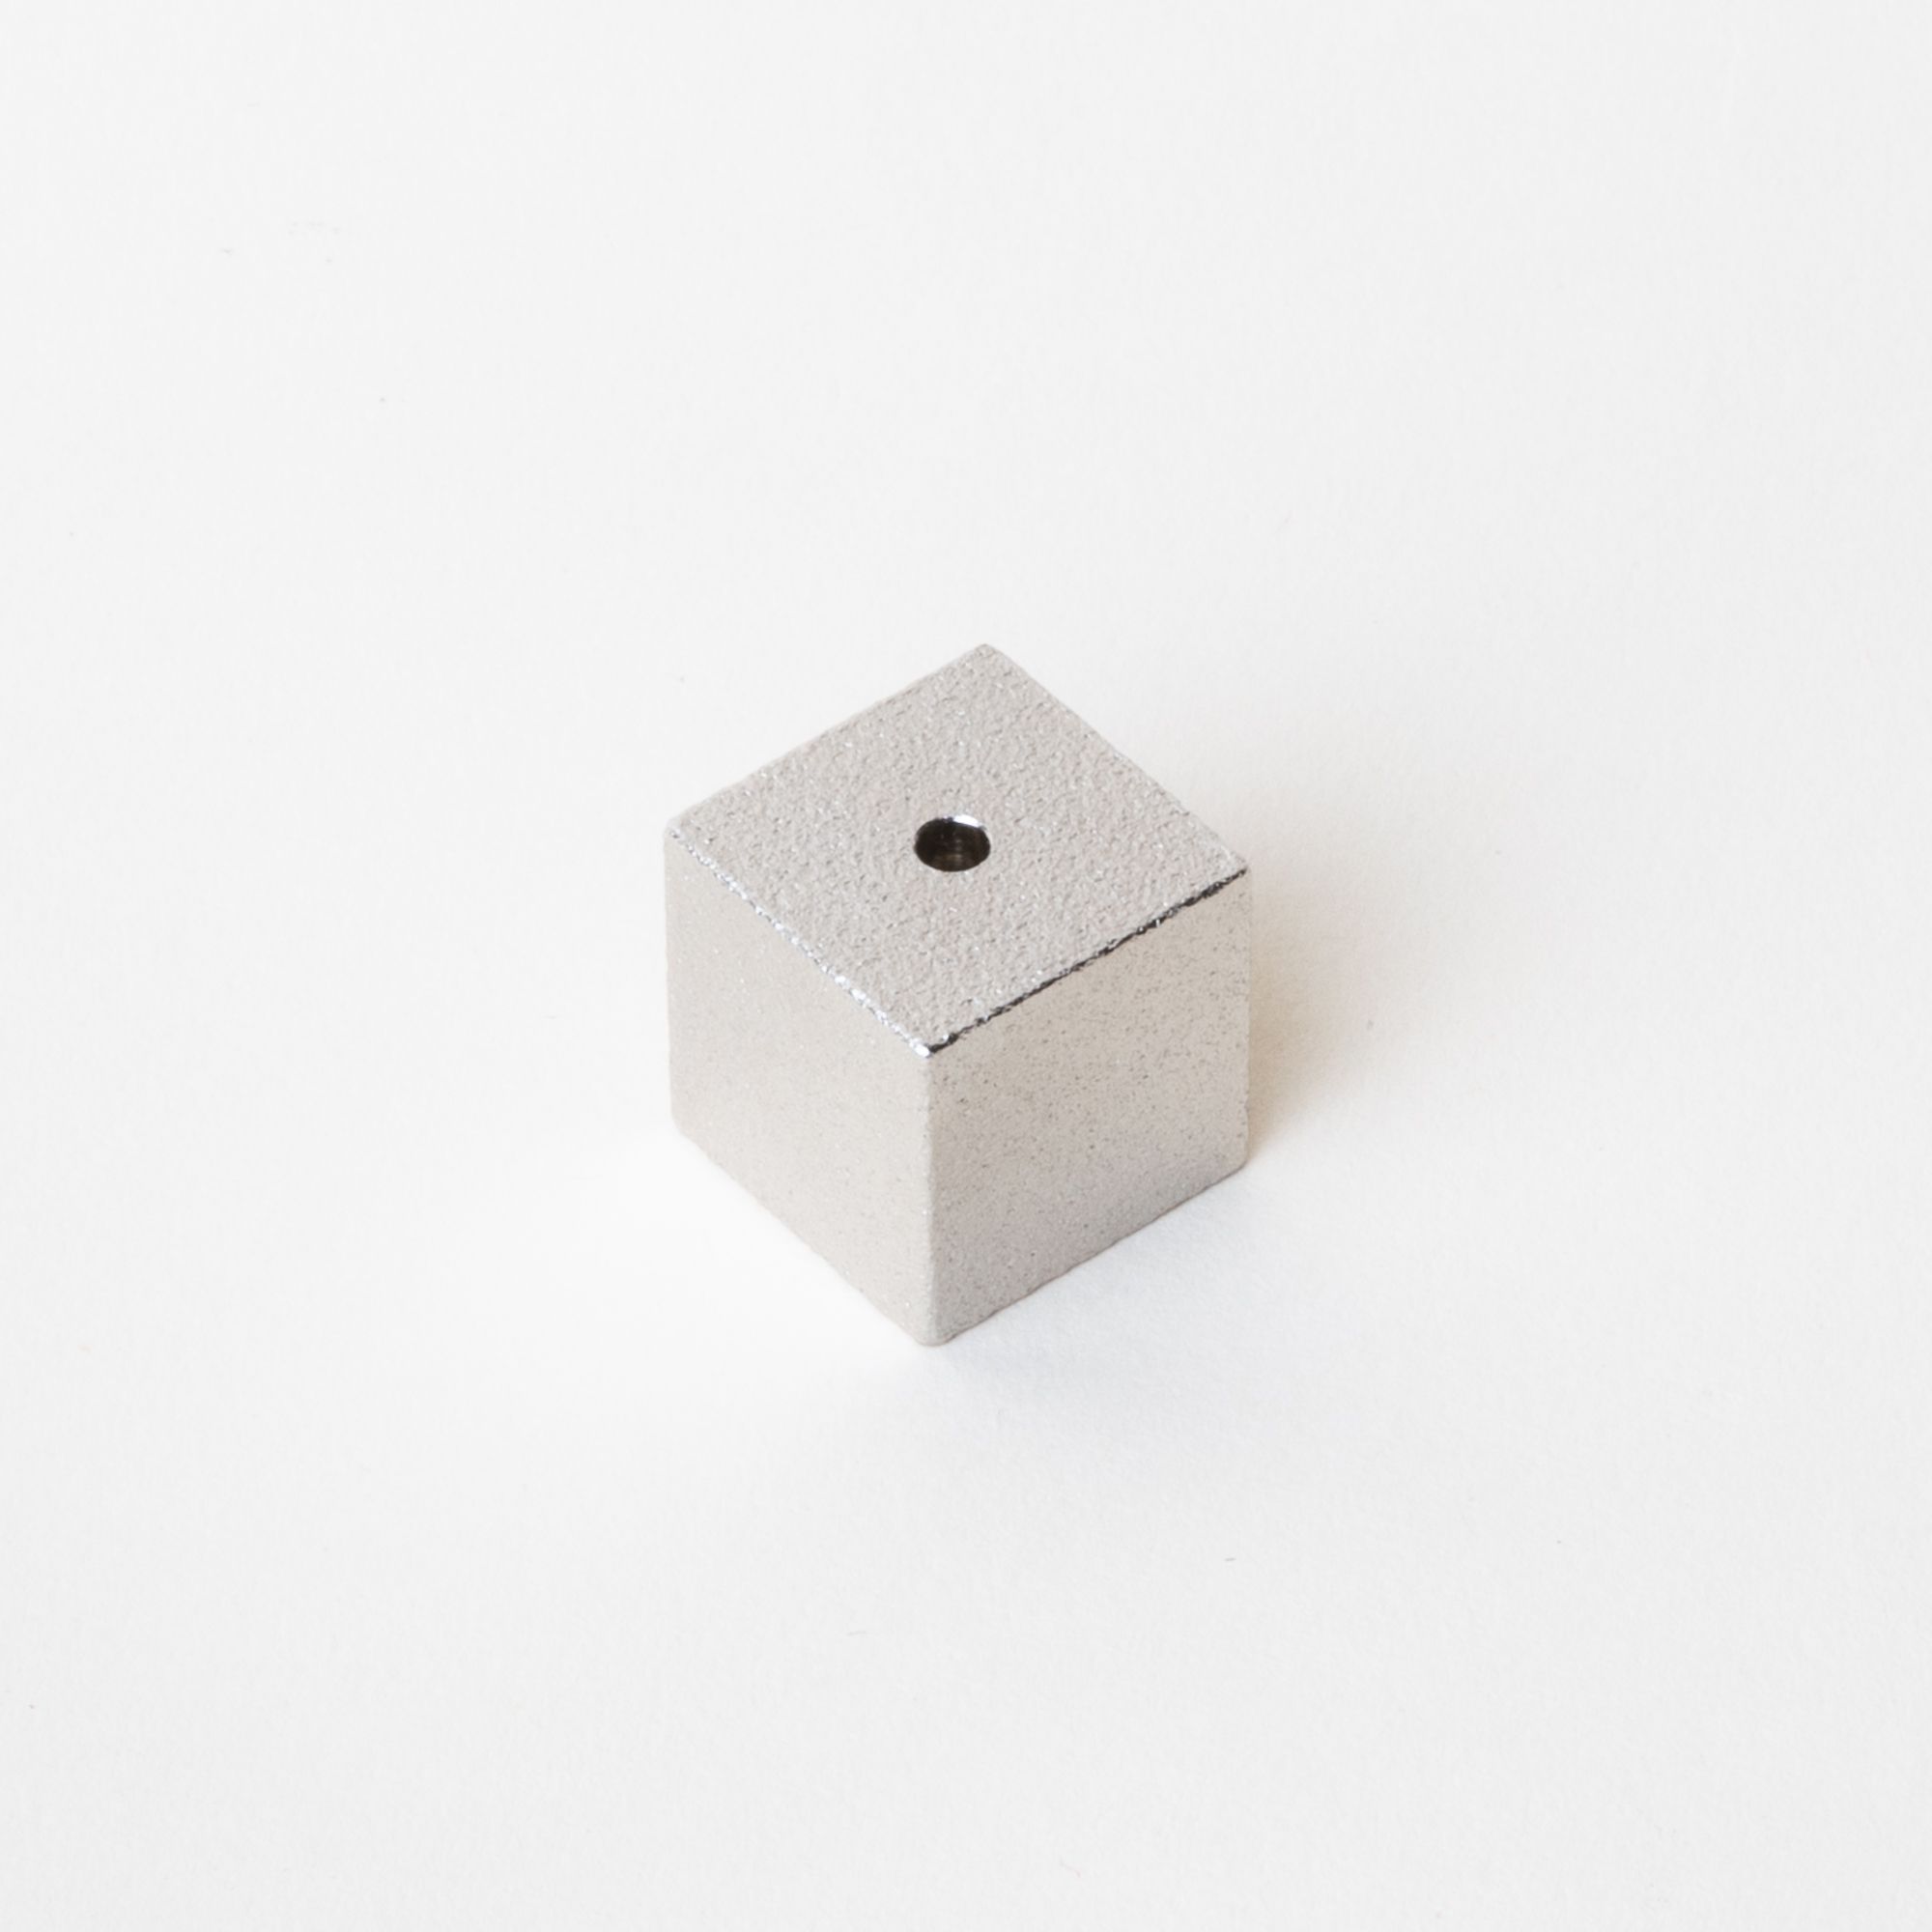 Minimal cube made of pewter with a small hole on the top for incense